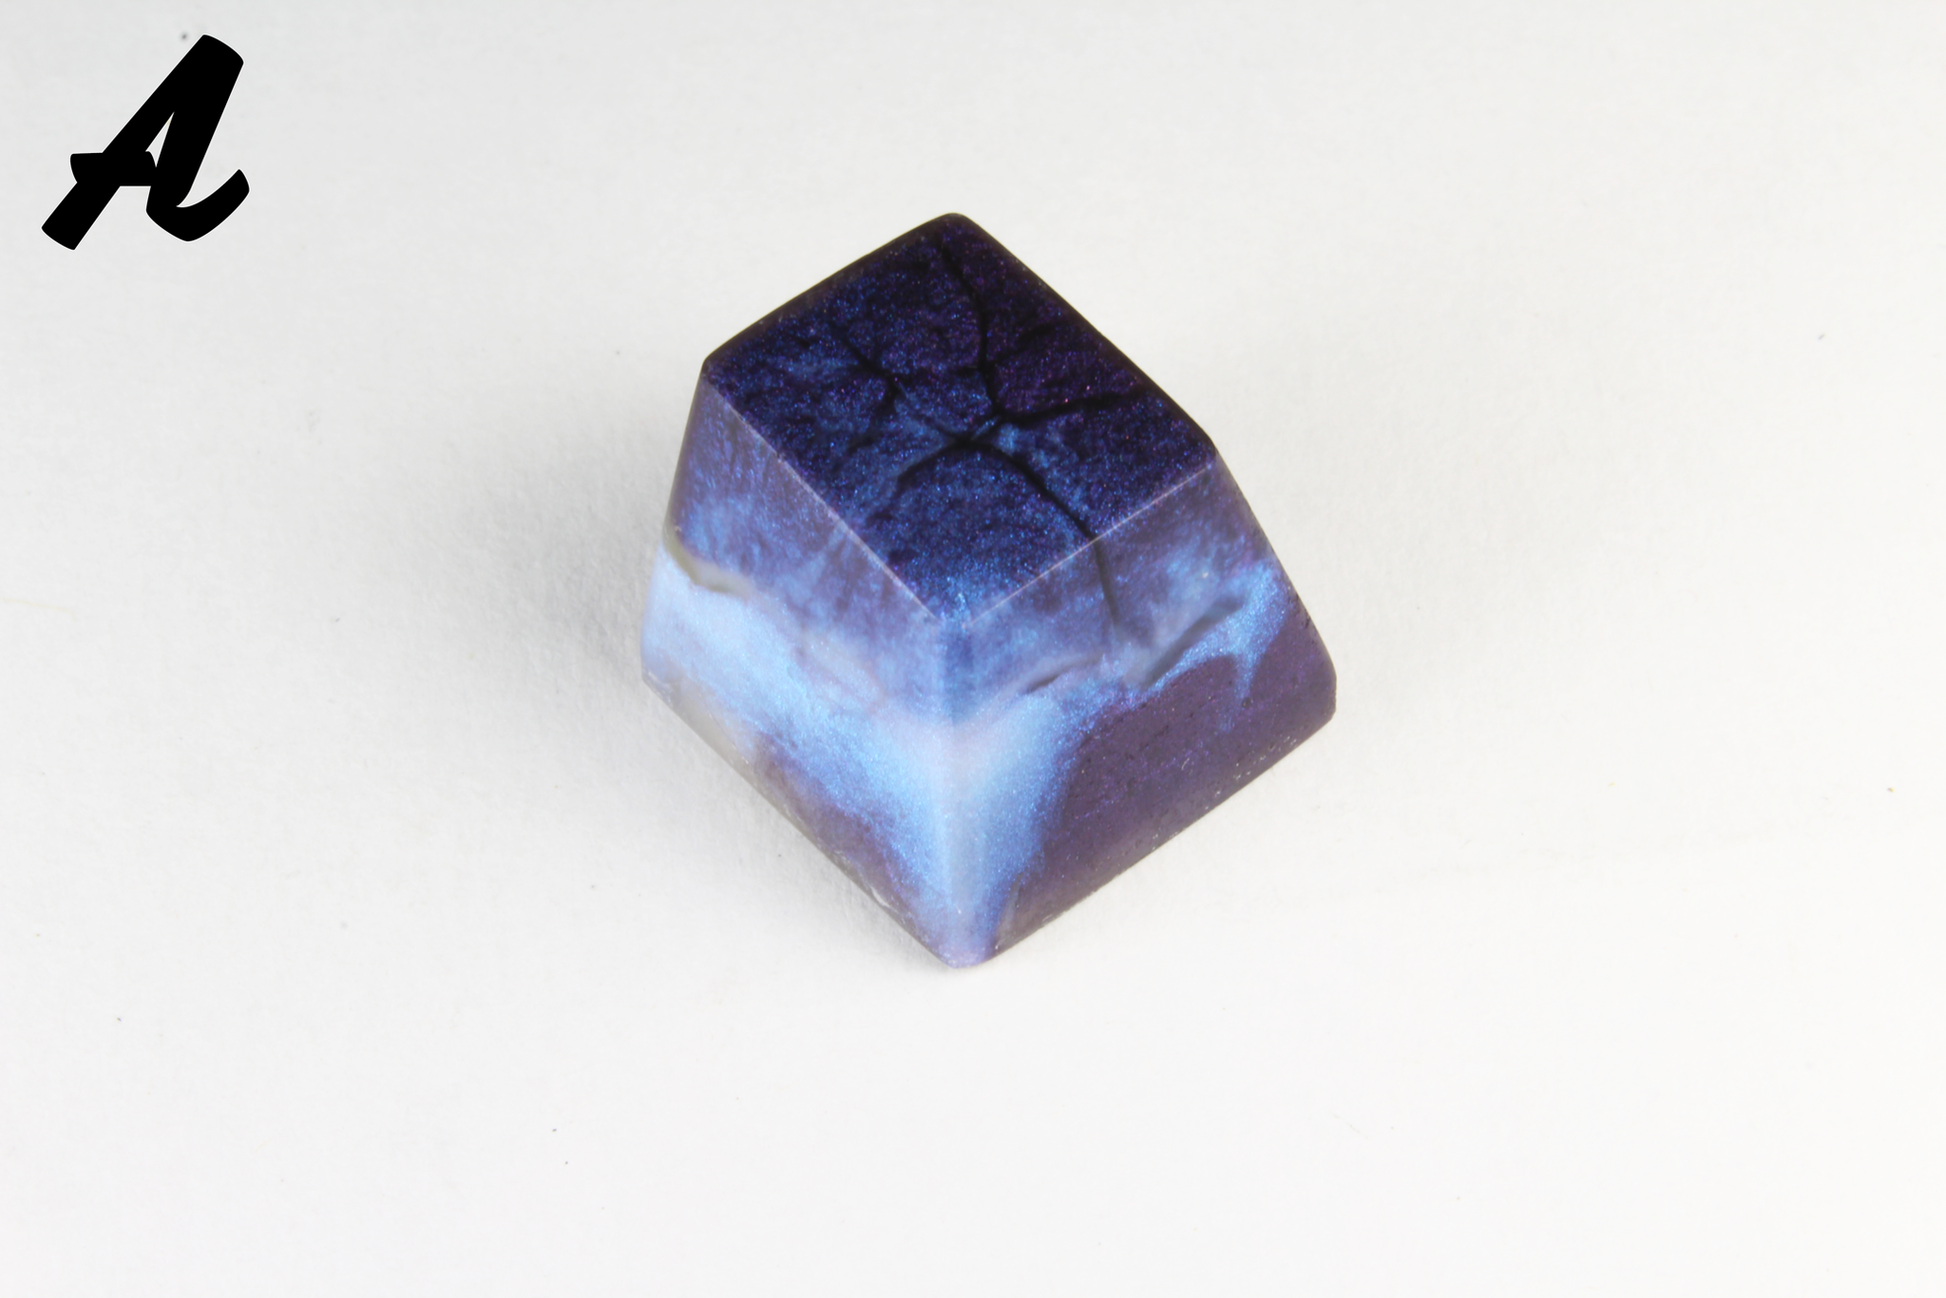 Chaos Caps 1.1 - Violet Moonlight - PrimeCaps Keycap - Blank and Sculpted Artisan Keycaps for cherry MX mechanical keyboards 